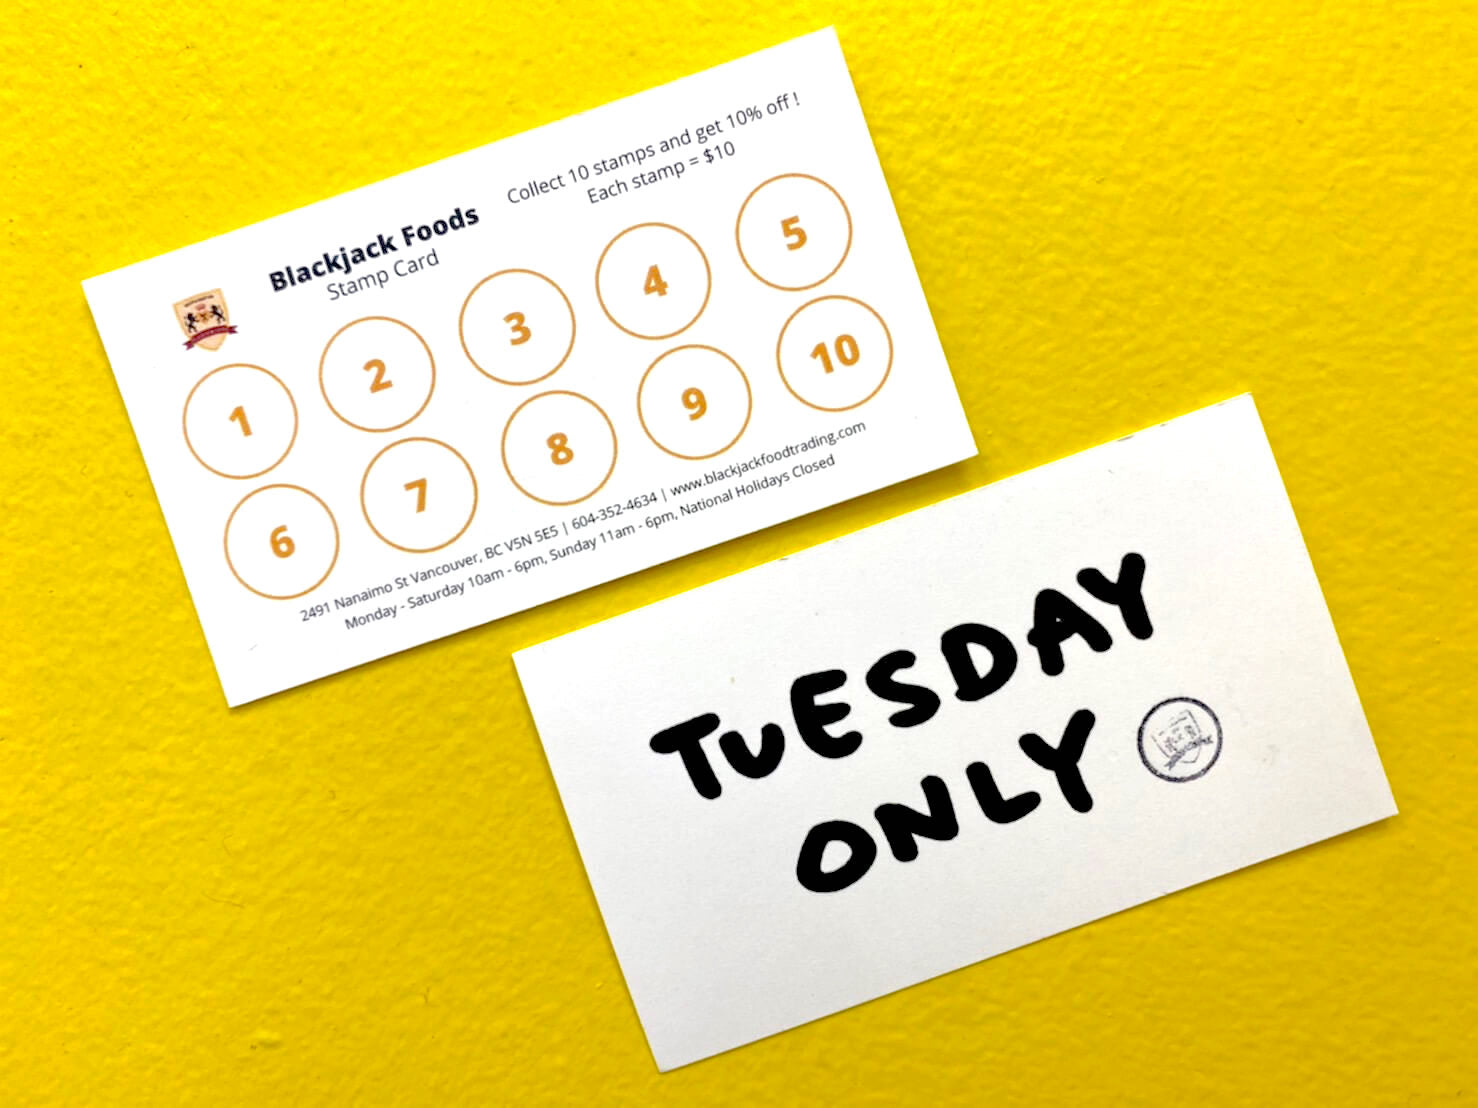 Tuesday Point Card Day !